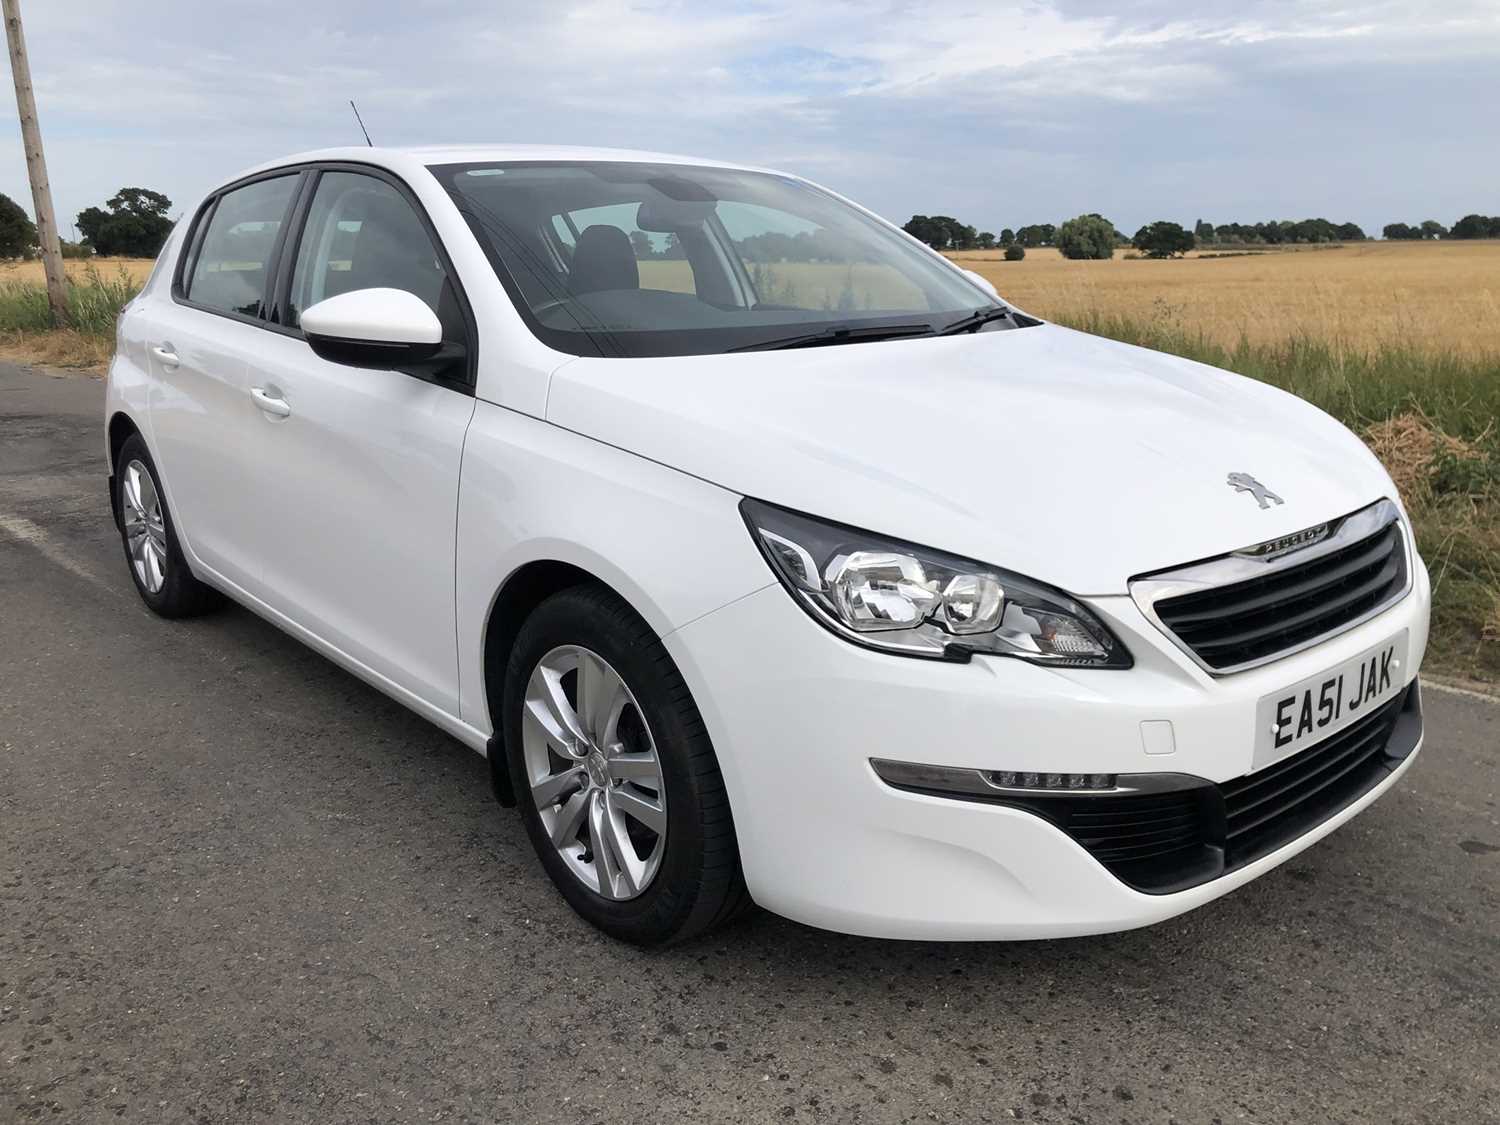 Lot 1917 - 2016 Peugeot 308 1.2 PureTech 130 Active, petrol, automatic, cherised registration EA51 JAK included with car, finished in white, MOT until 18th August 2022.